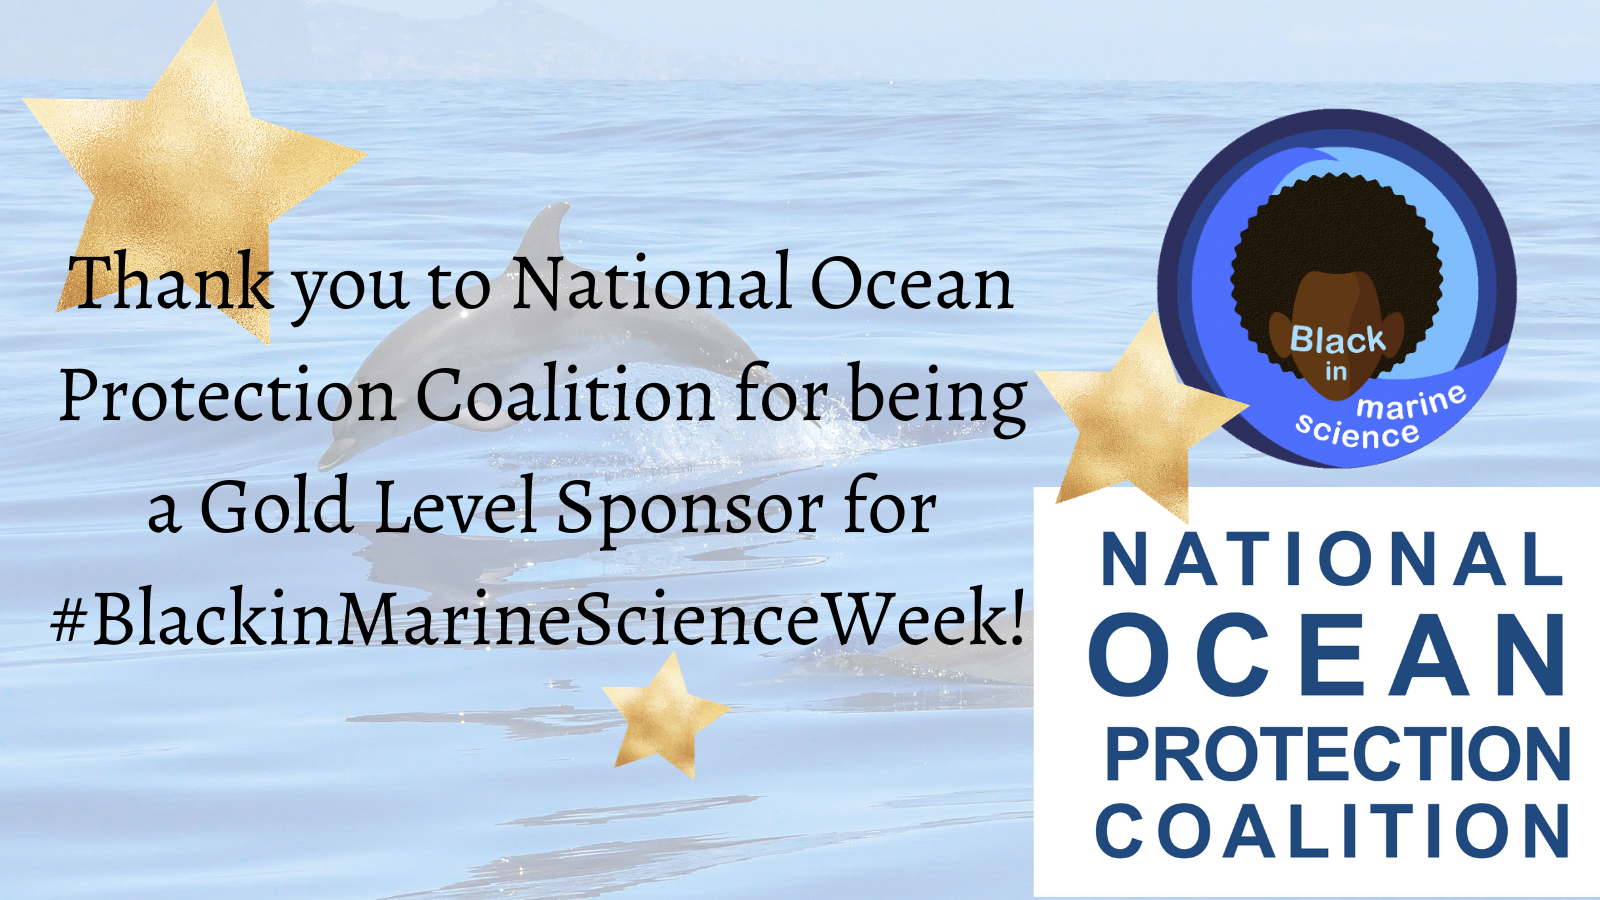 Thank you to the National Ocean Protection Coalition for being a Gold Level Sponsor for Black in Marine Science Week